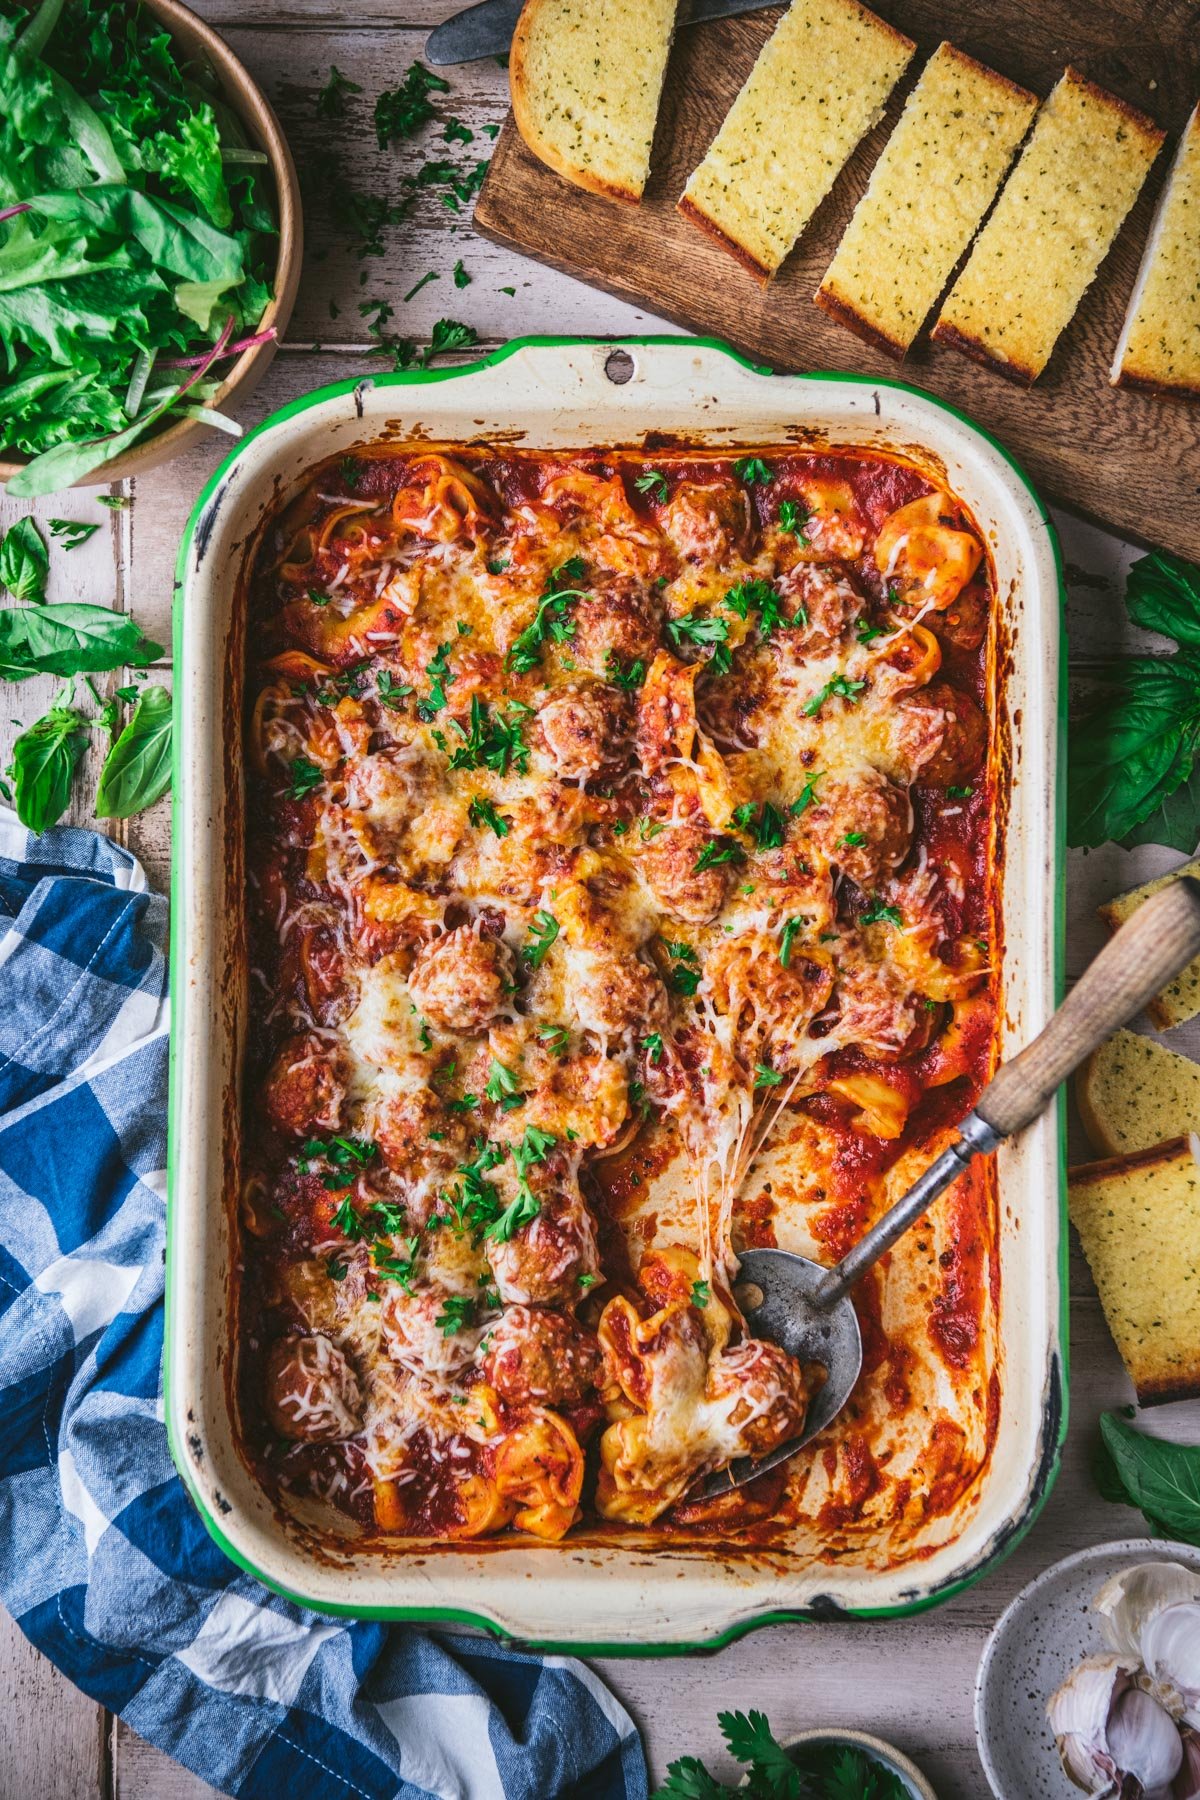 Overhead image of a tortellini and meatball casserole with fresh herbs on top.